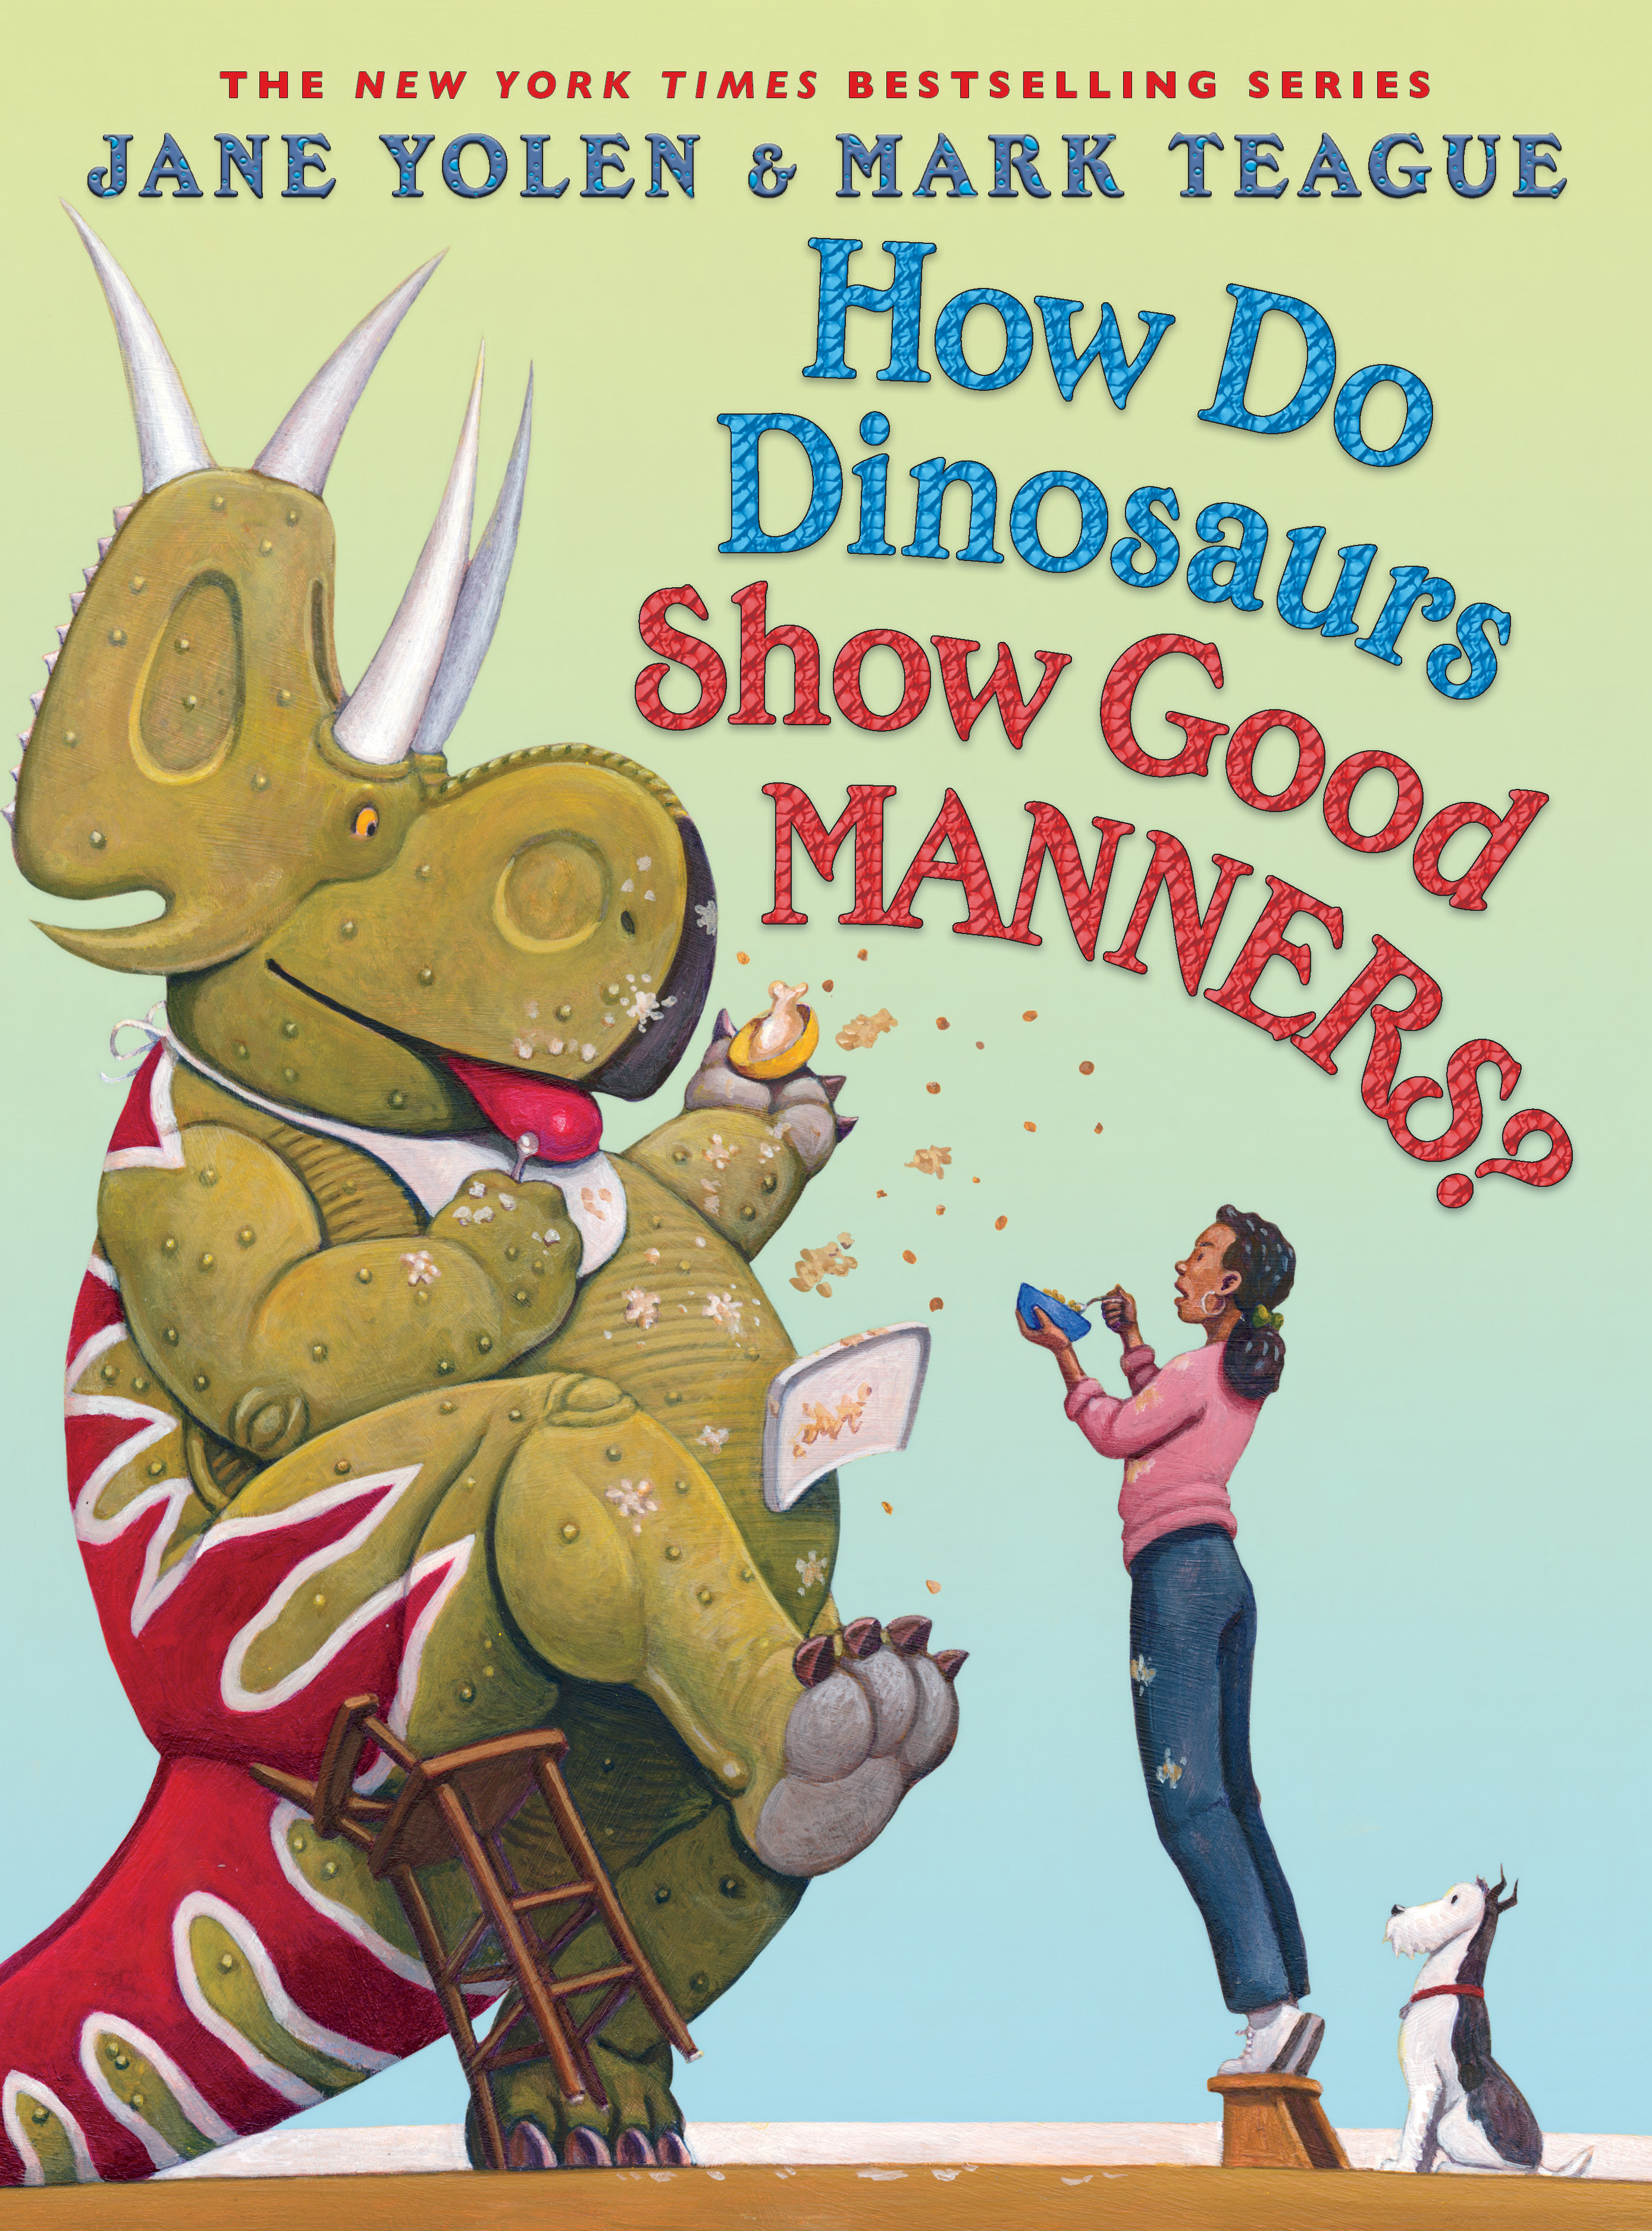 How do dinosaurs show good manners?